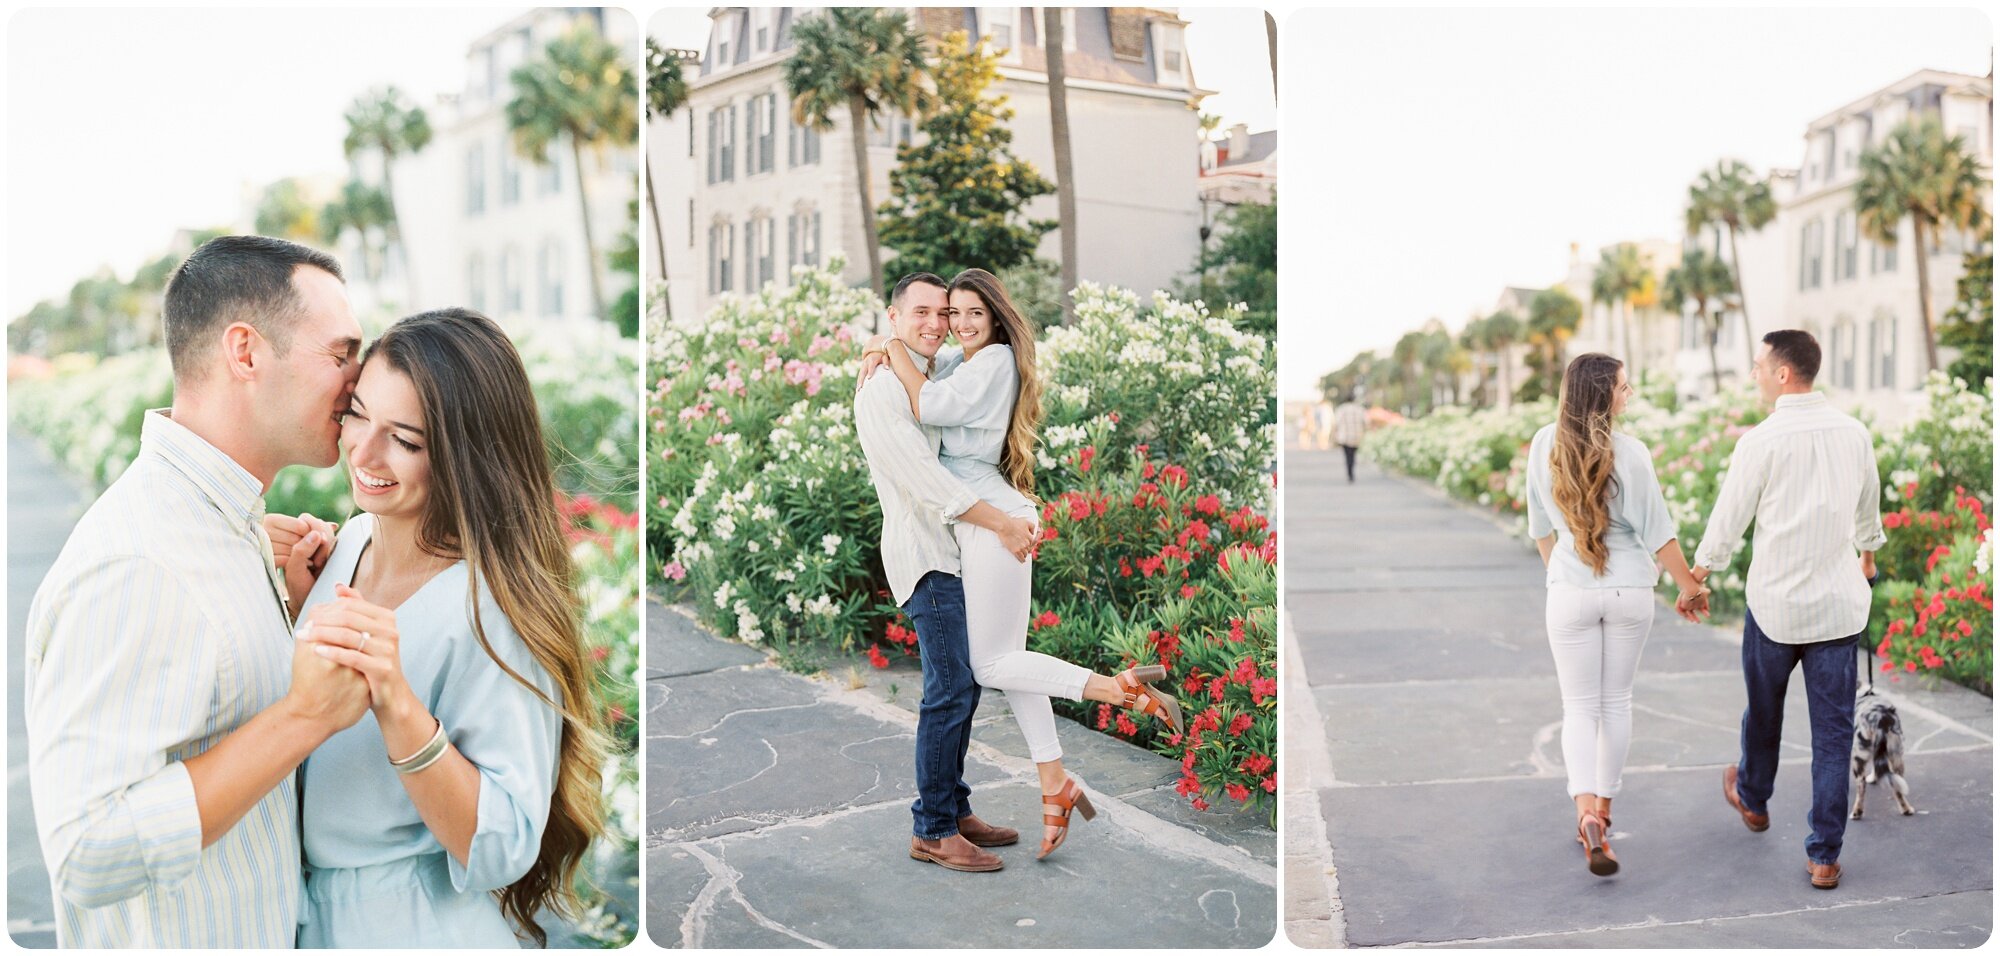 rainbow_row_yellow_blue_outfit_battery_downtown_charleston_engagement_puppy_outdoor_wedding_photographers_husband_wife_team_kailee_tim_kailee_dimeglio_photography_charleston_traveling_photographers_0016.jpg